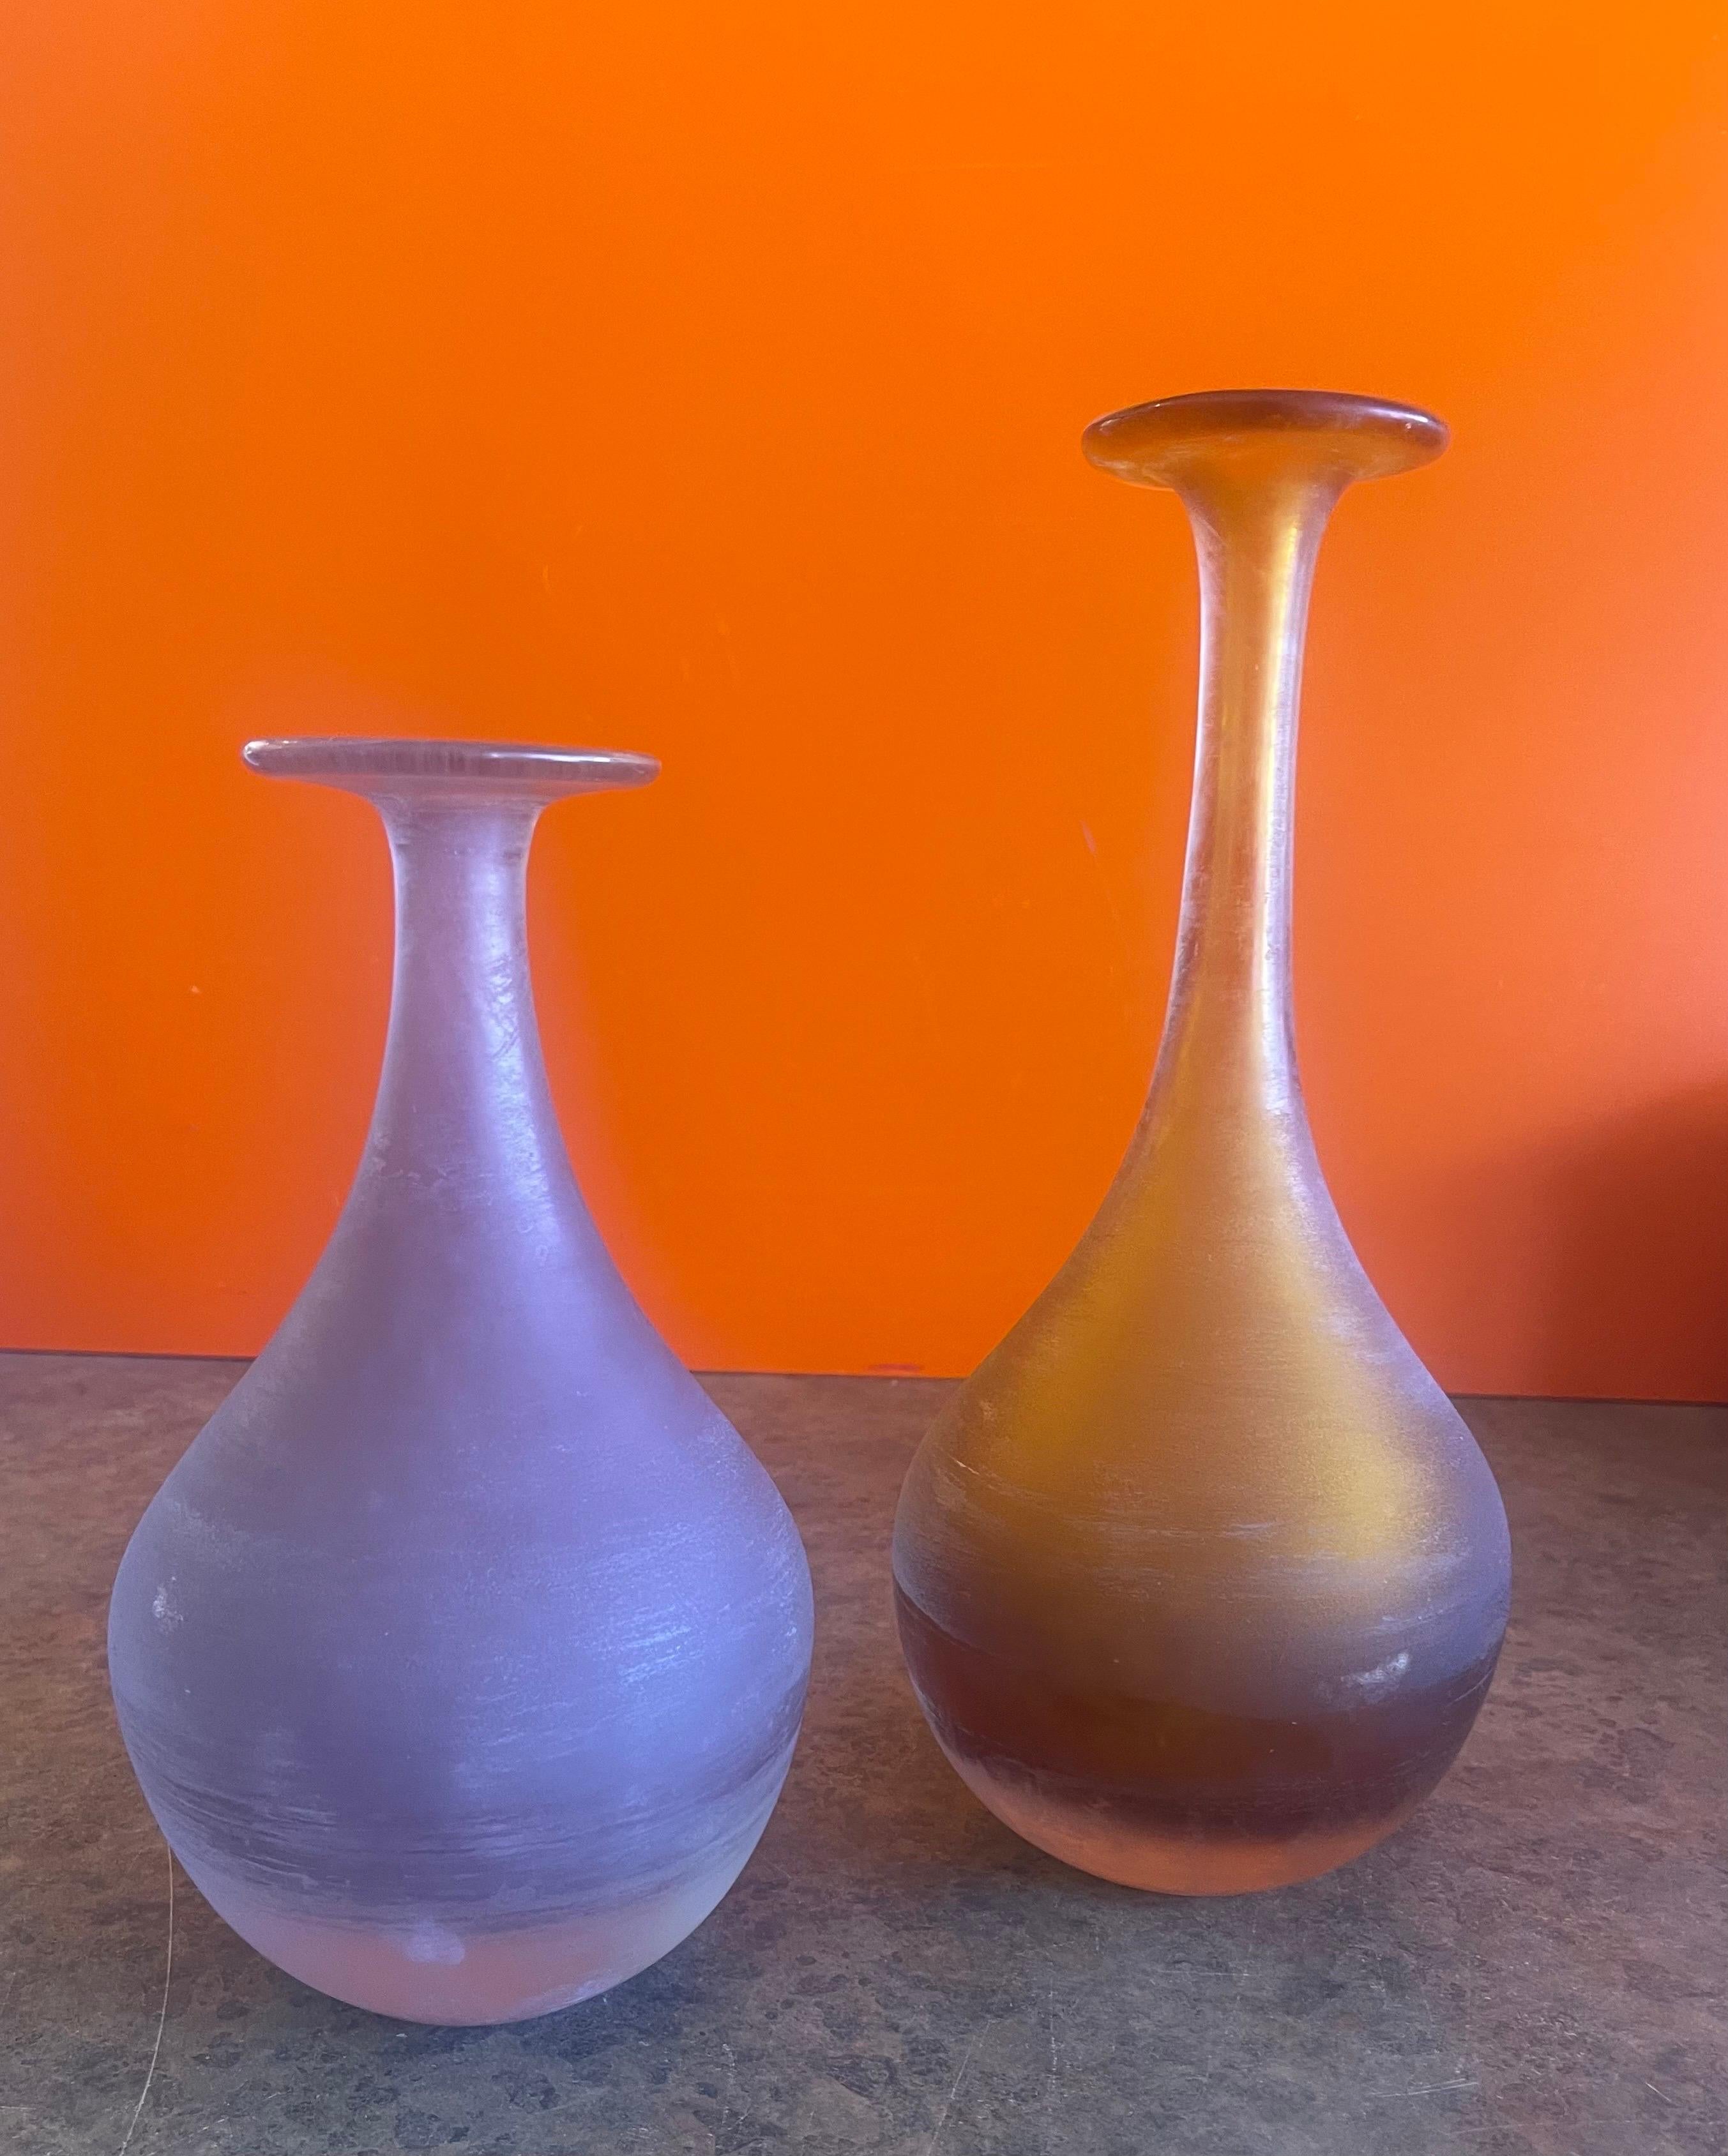 Gorgeous pair of post-modern Italian Venetian art glass vases, circa 1990s. The smaller vase is a bluish purple in color and the taller one is a striking yellow. The pair are in very good vintage condition with no chips or cracks and measure 5.5